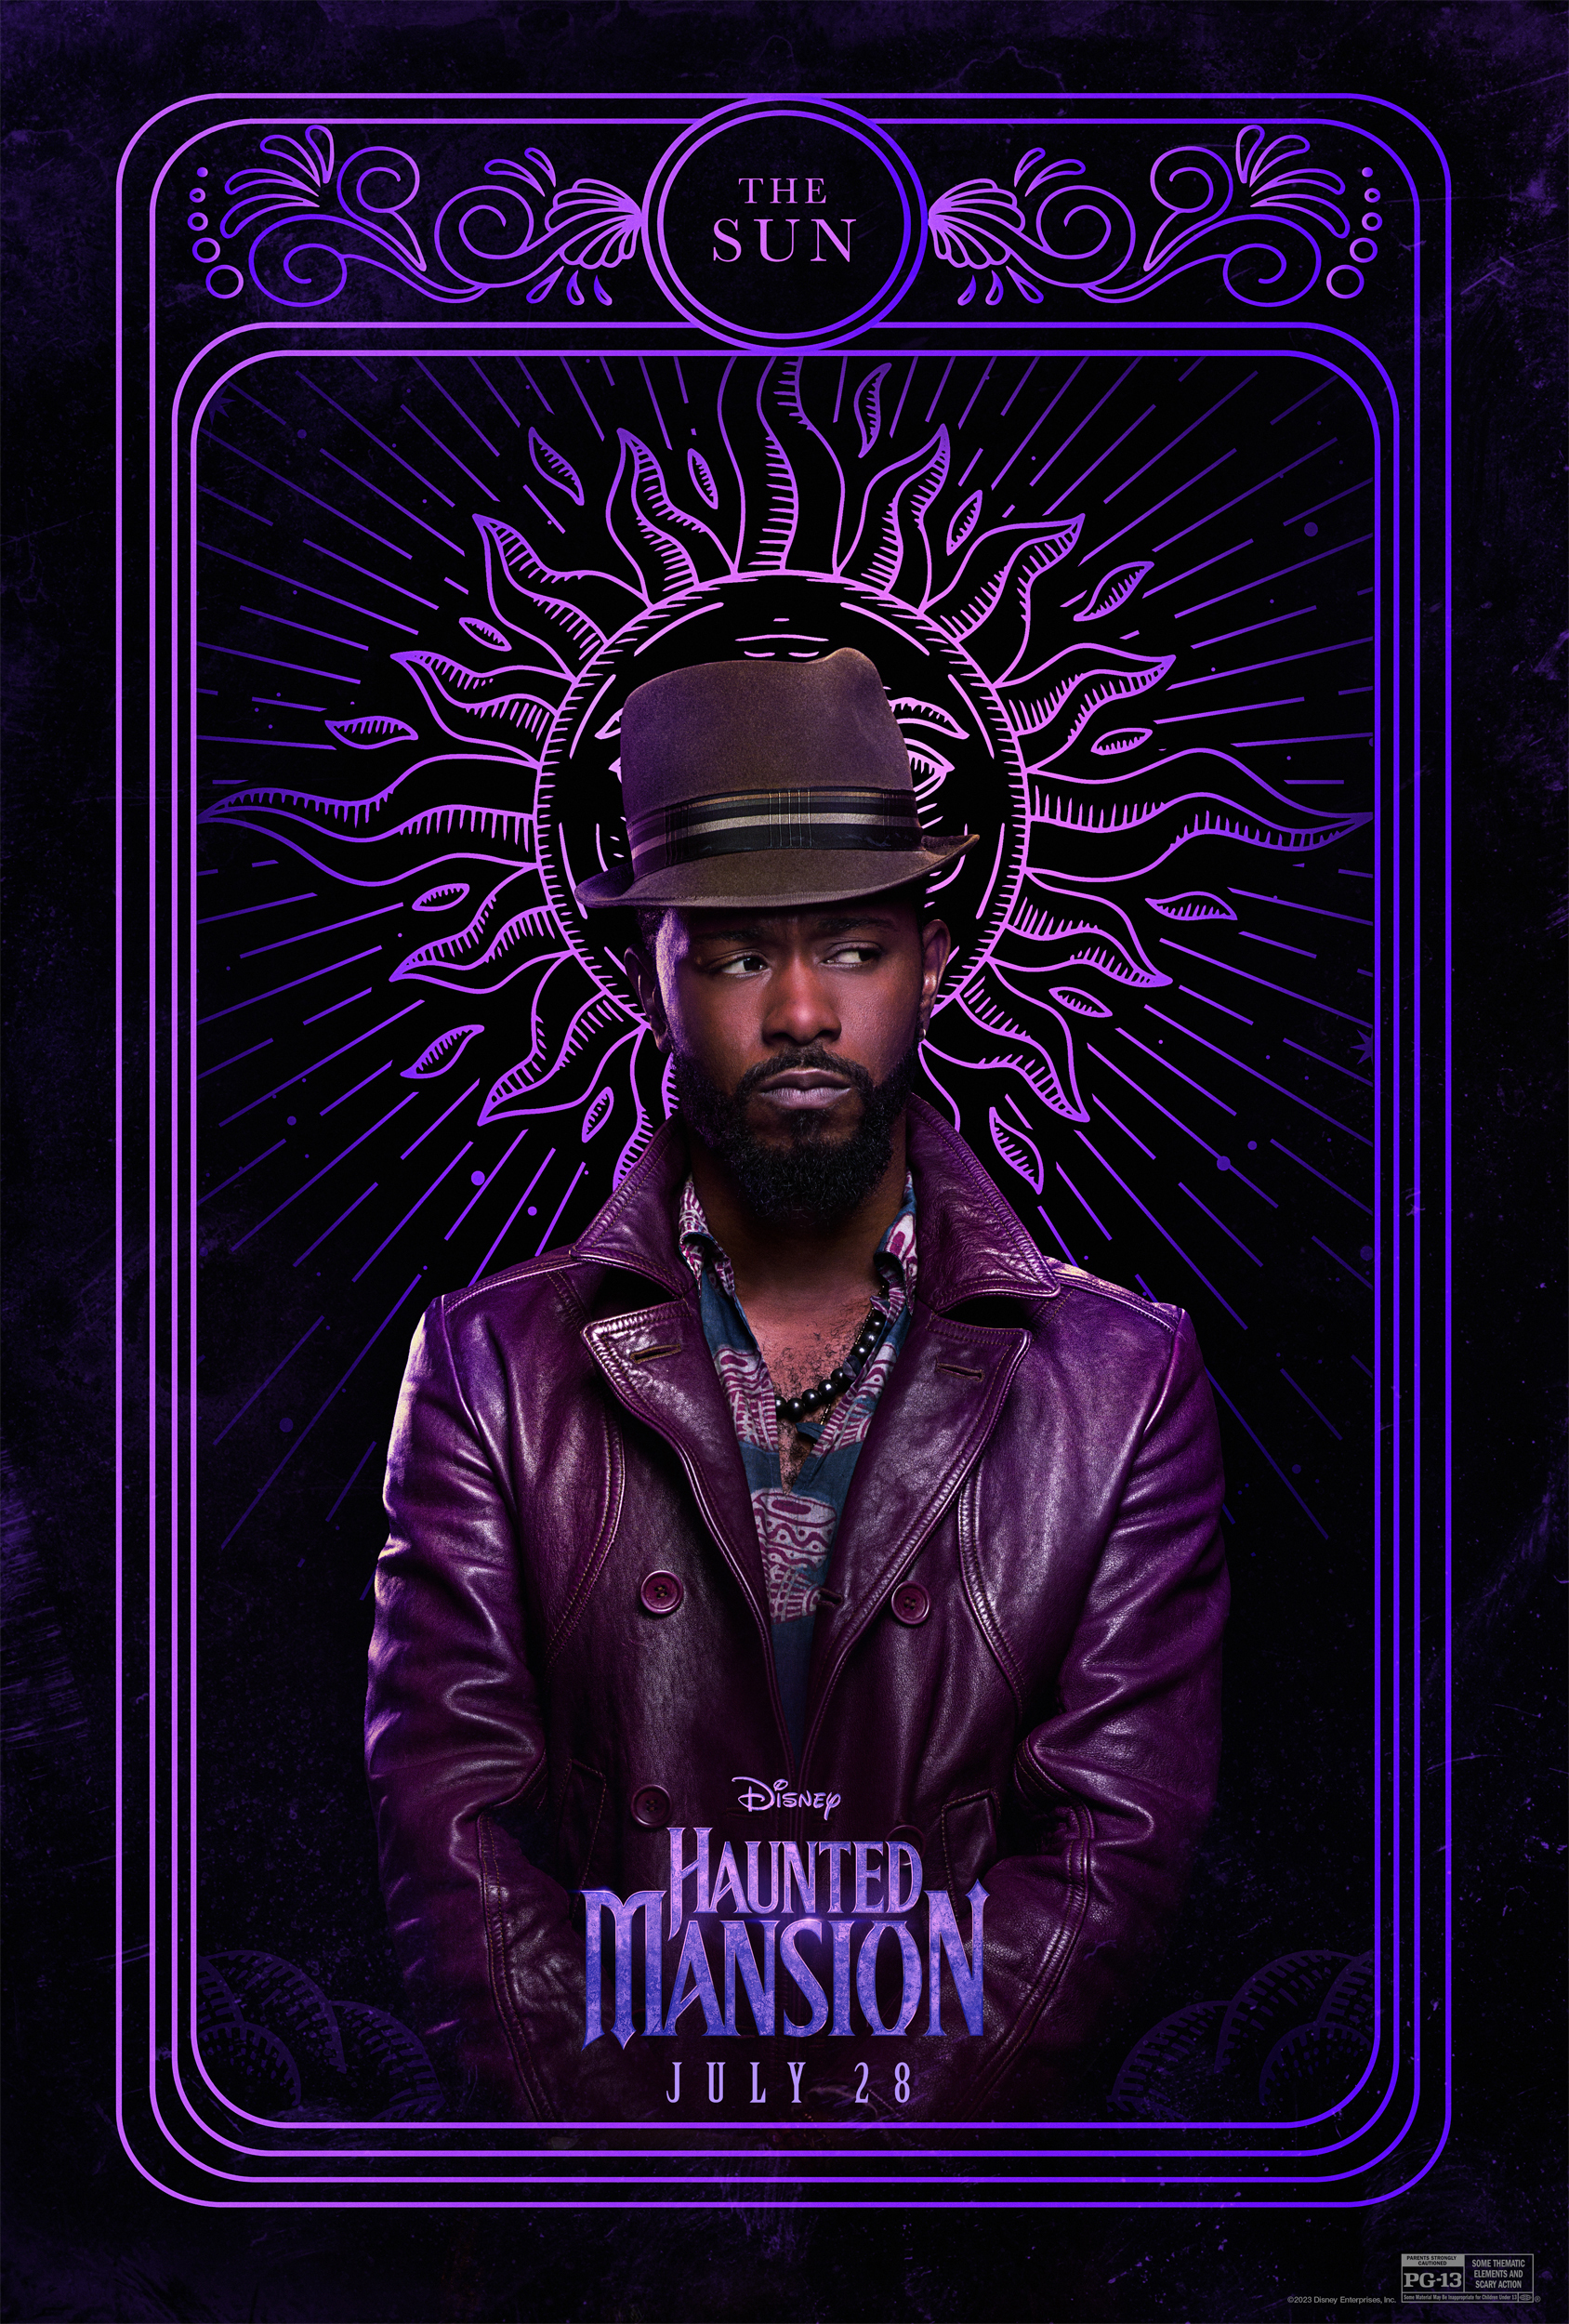 Phone wallpaper featuring a stylized portrayal of a character with a sun motif for the upcoming 'The Haunted Mansion' movie set for a July release, perfect for fans of the supernatural genre.